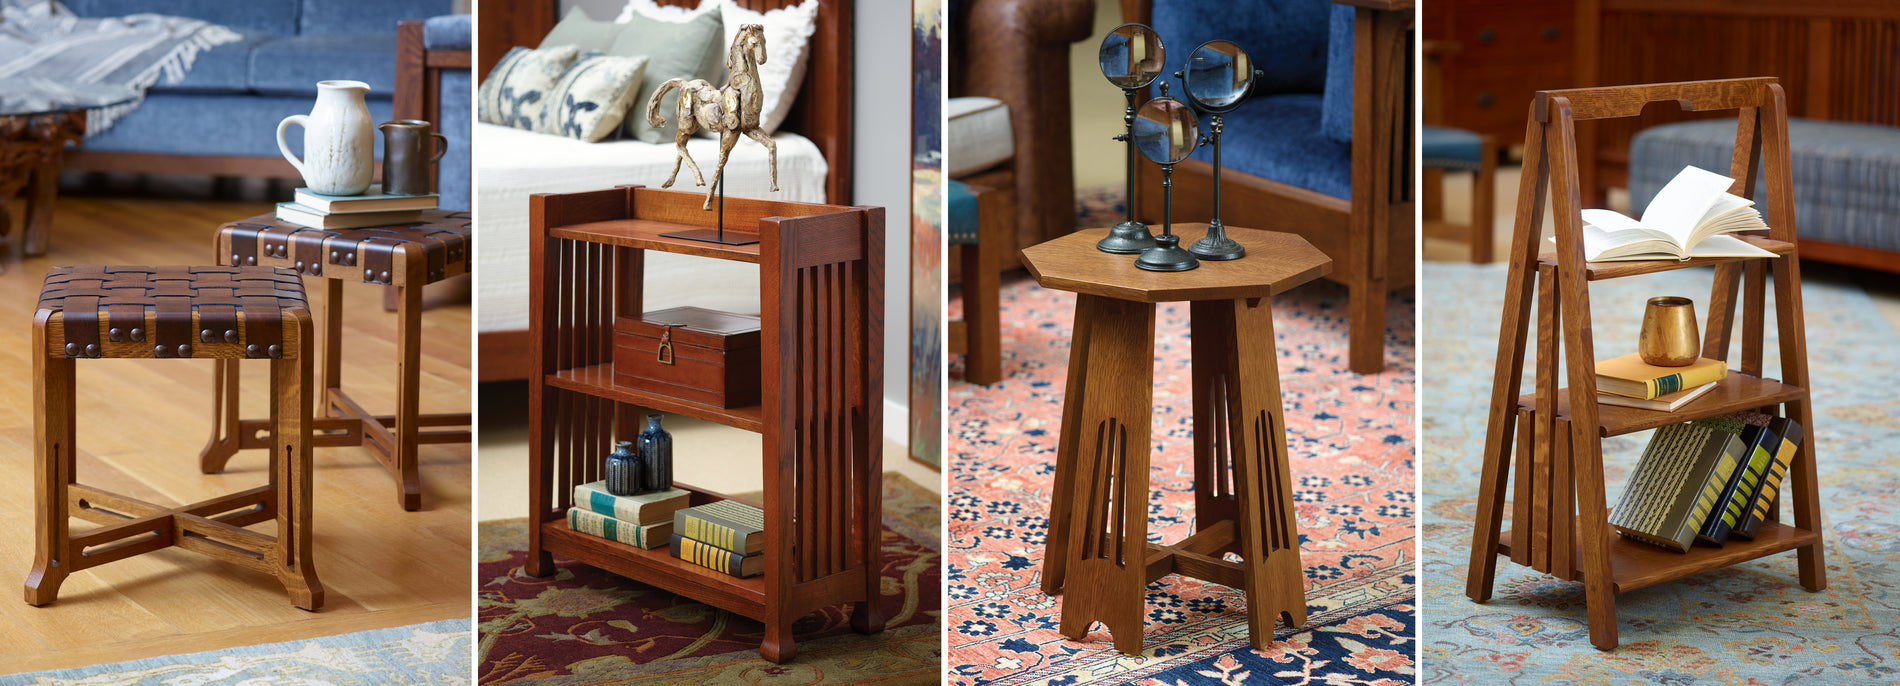 Four images in the order of showing: Little Treasures Stool, Book Rack, End Table, and Tiered Book Rack